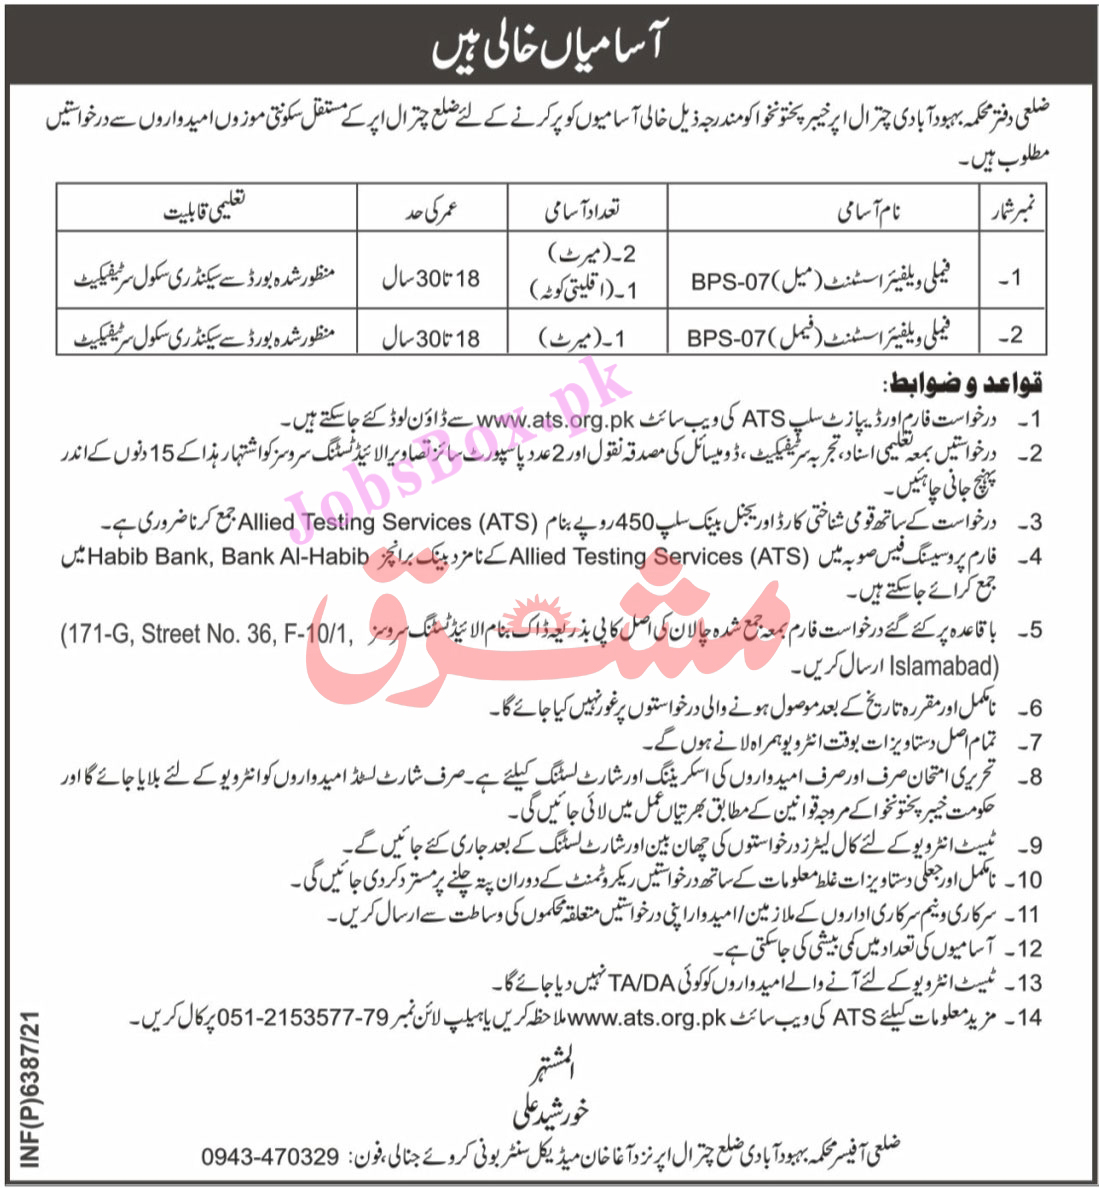 Chitral Upper Jobs for Family Welfare Assistant